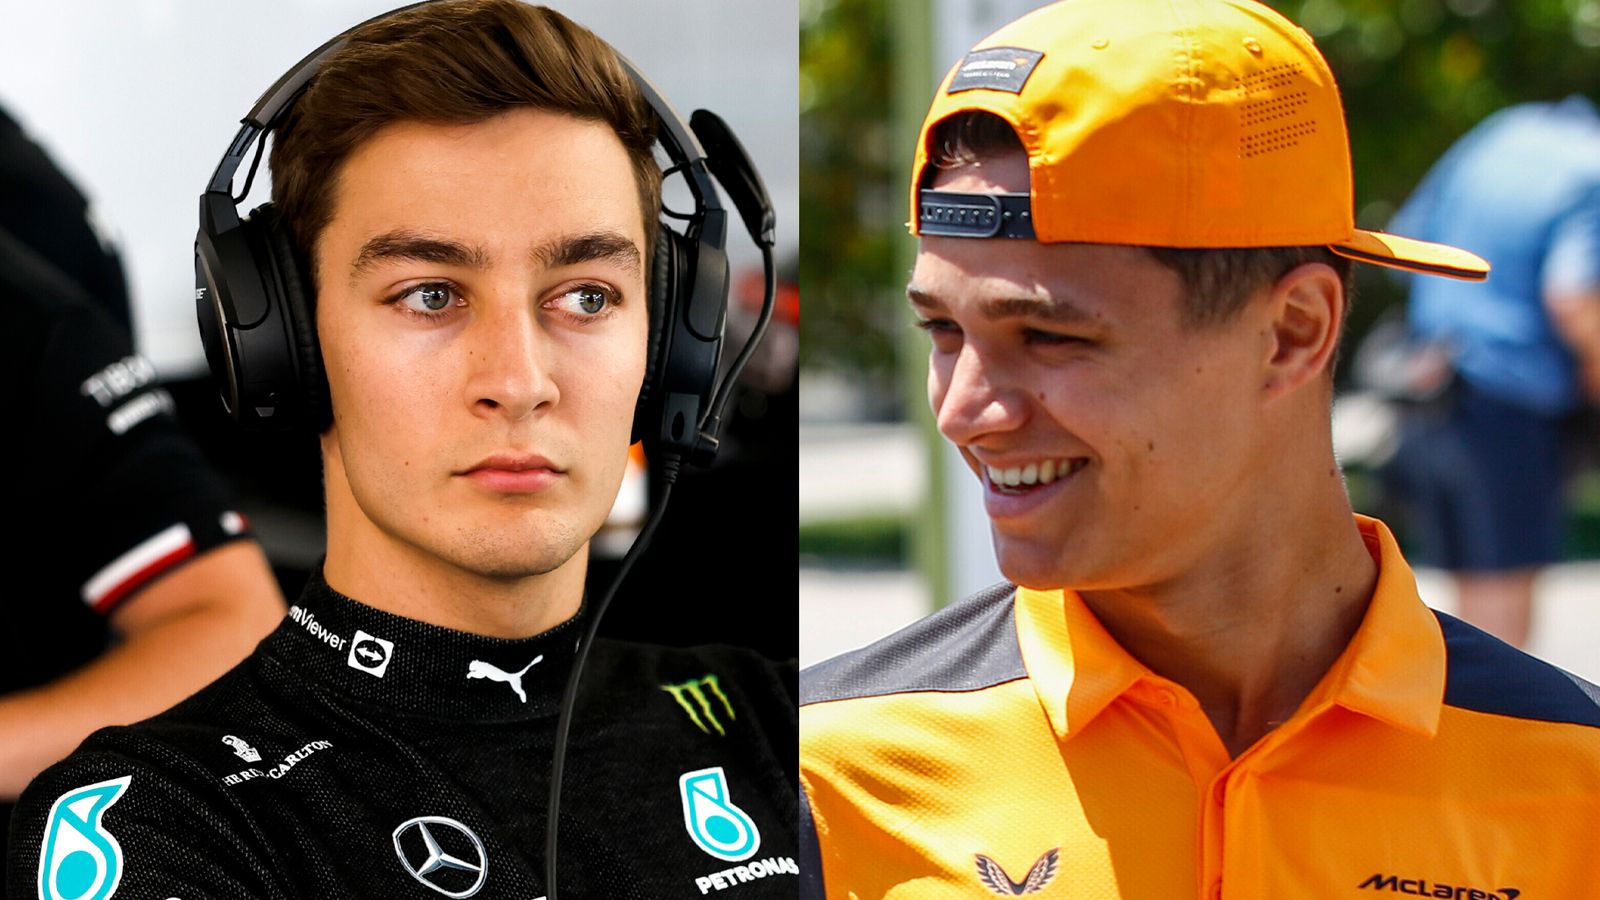 British GP: George Russell and Lando Norris showing F1’s post-Lewis Hamilton era in great shape